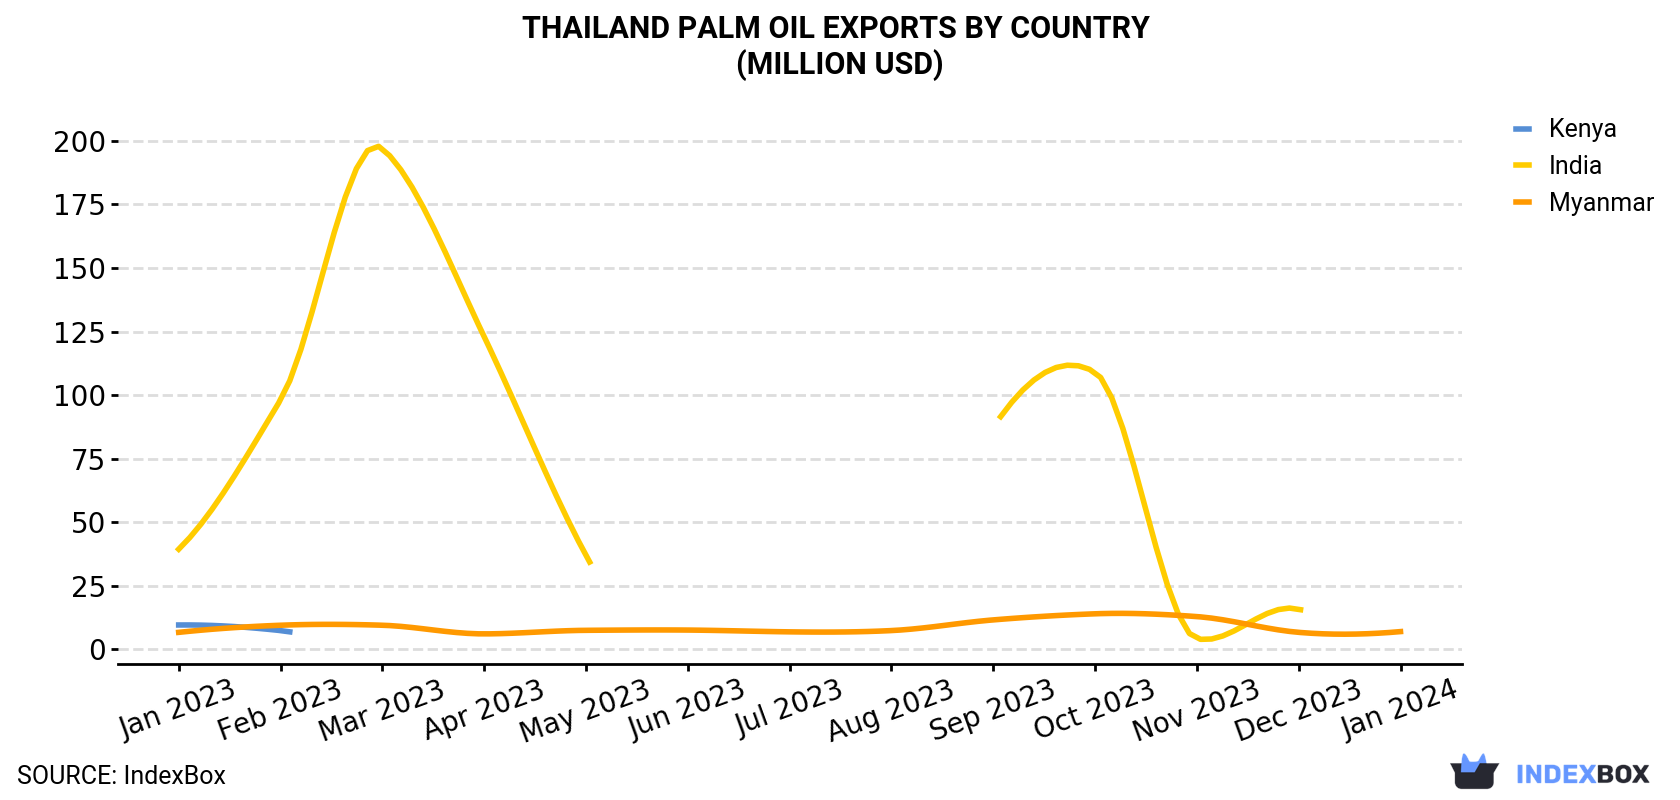 Thailand Palm Oil Exports By Country (Million USD)